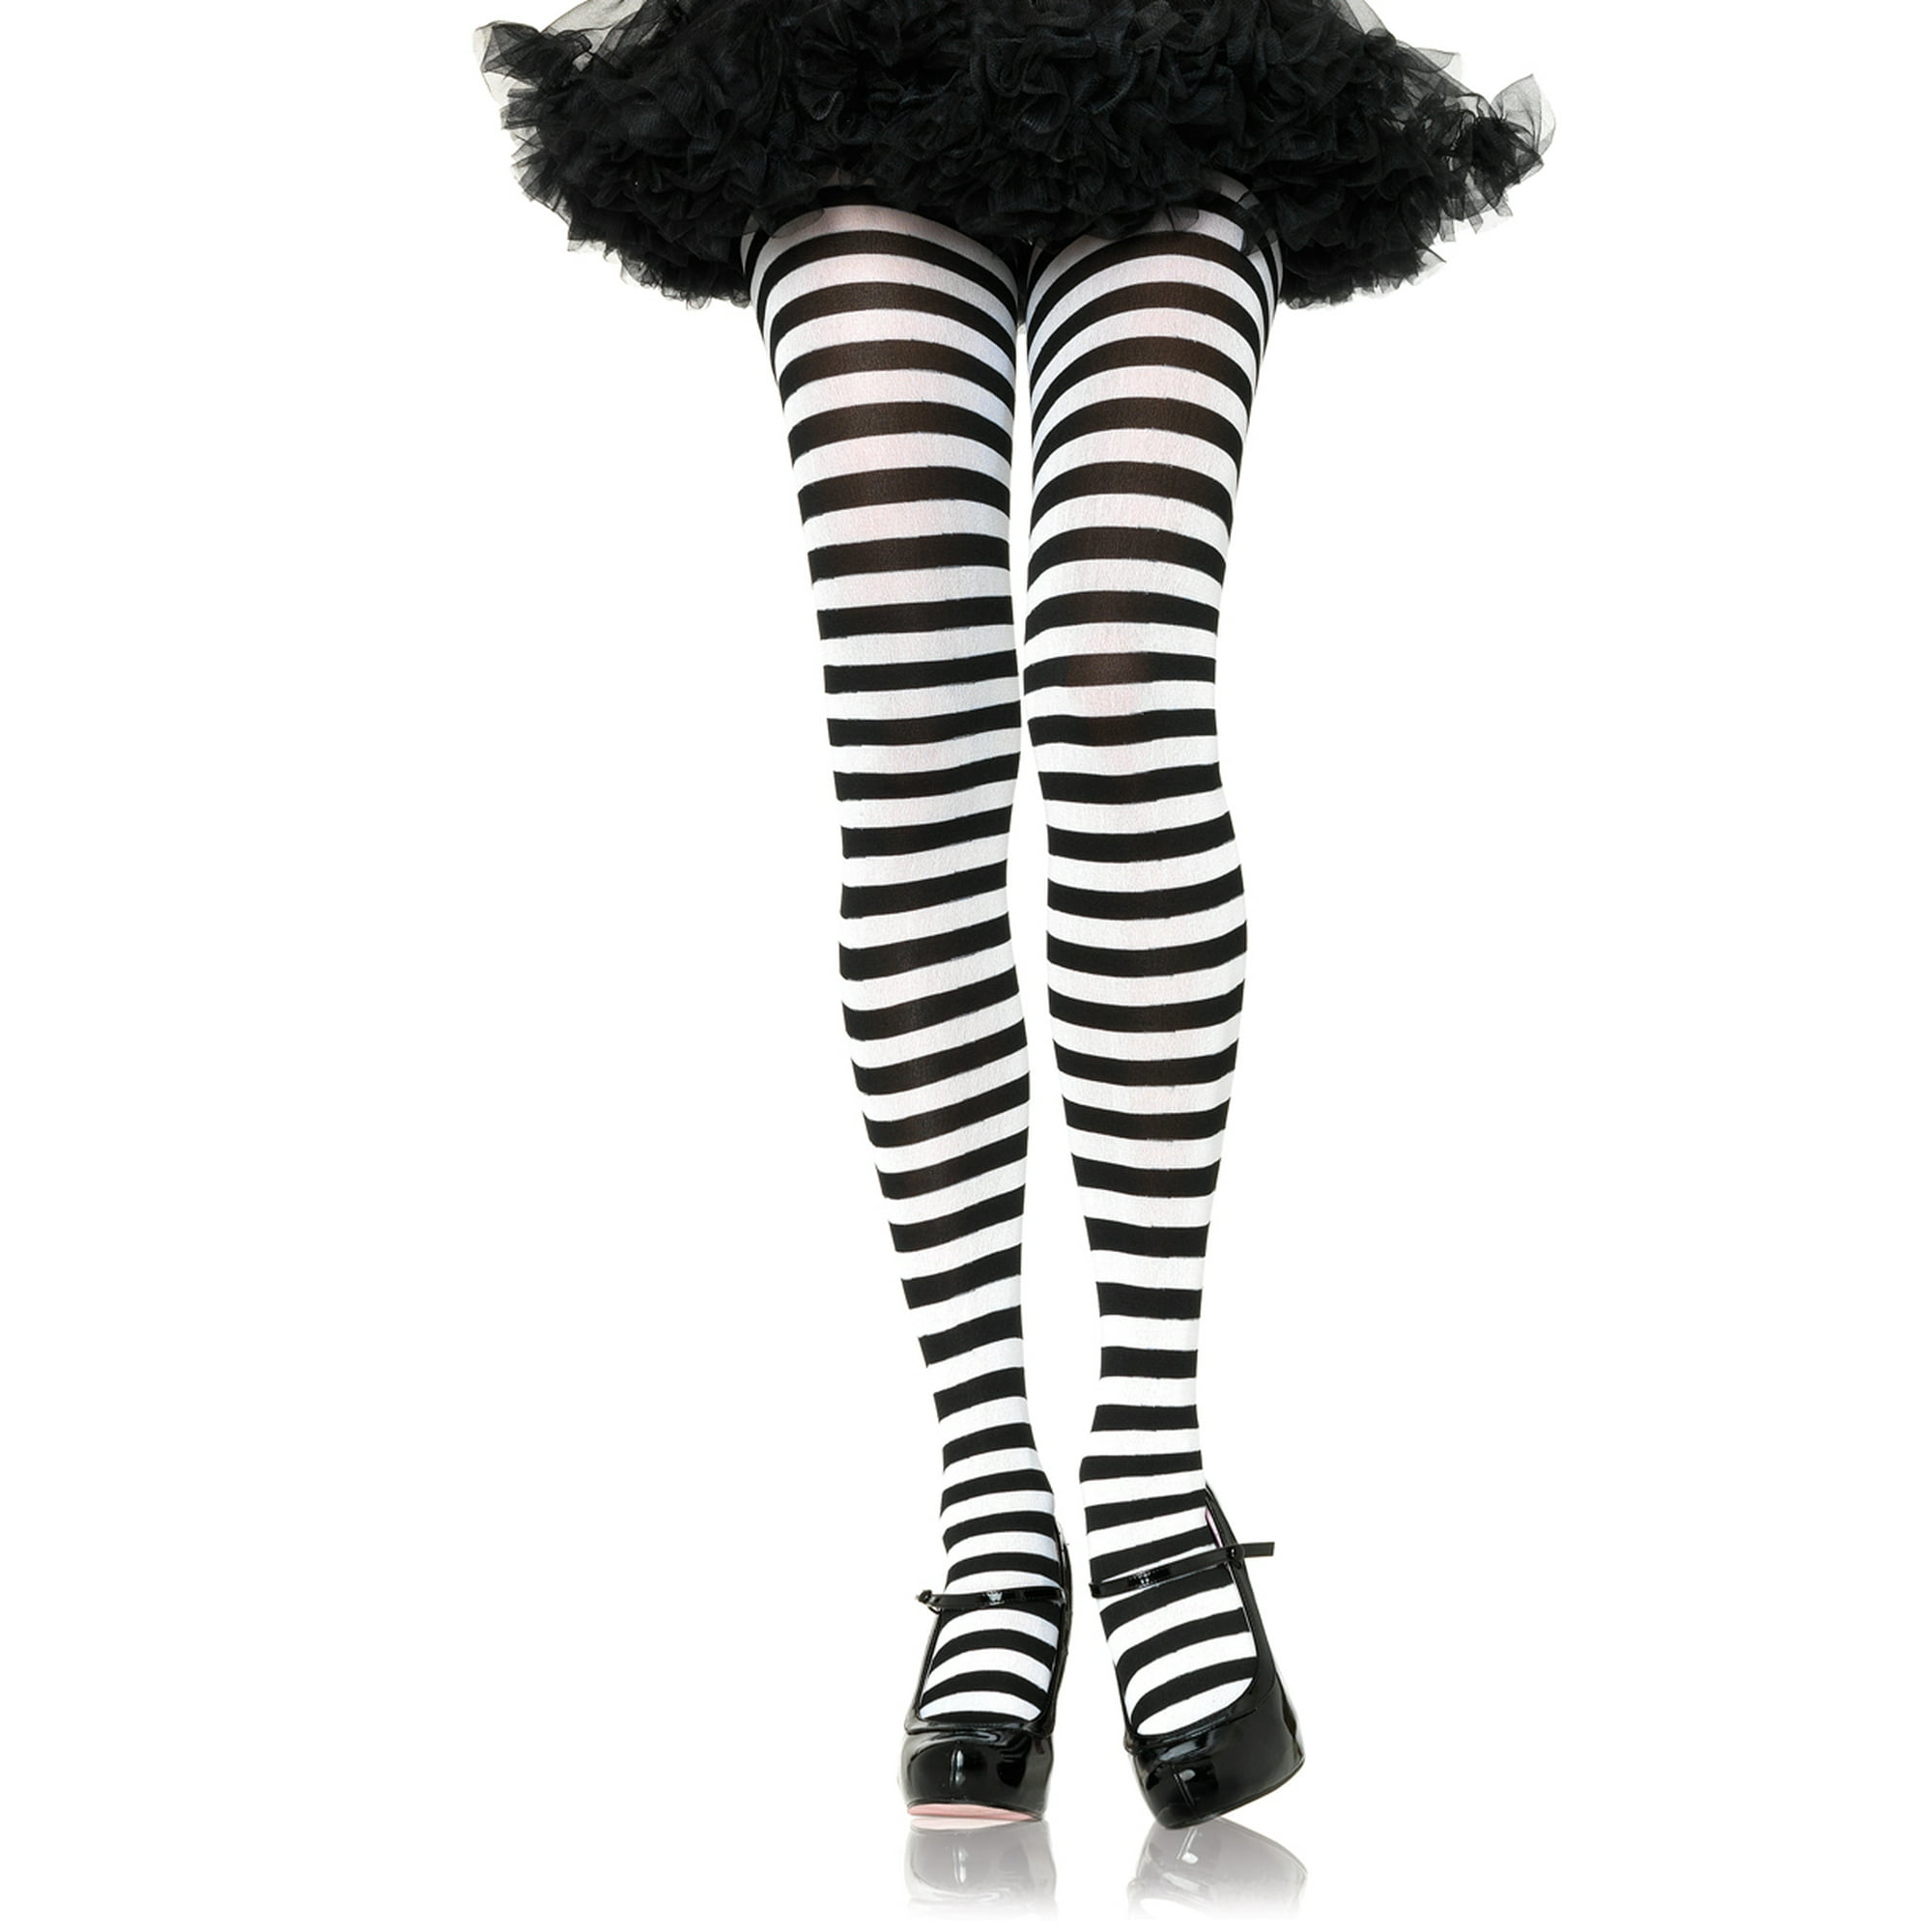 Girl In Black And White Striped Tights Stock Photo Image Of Makeup